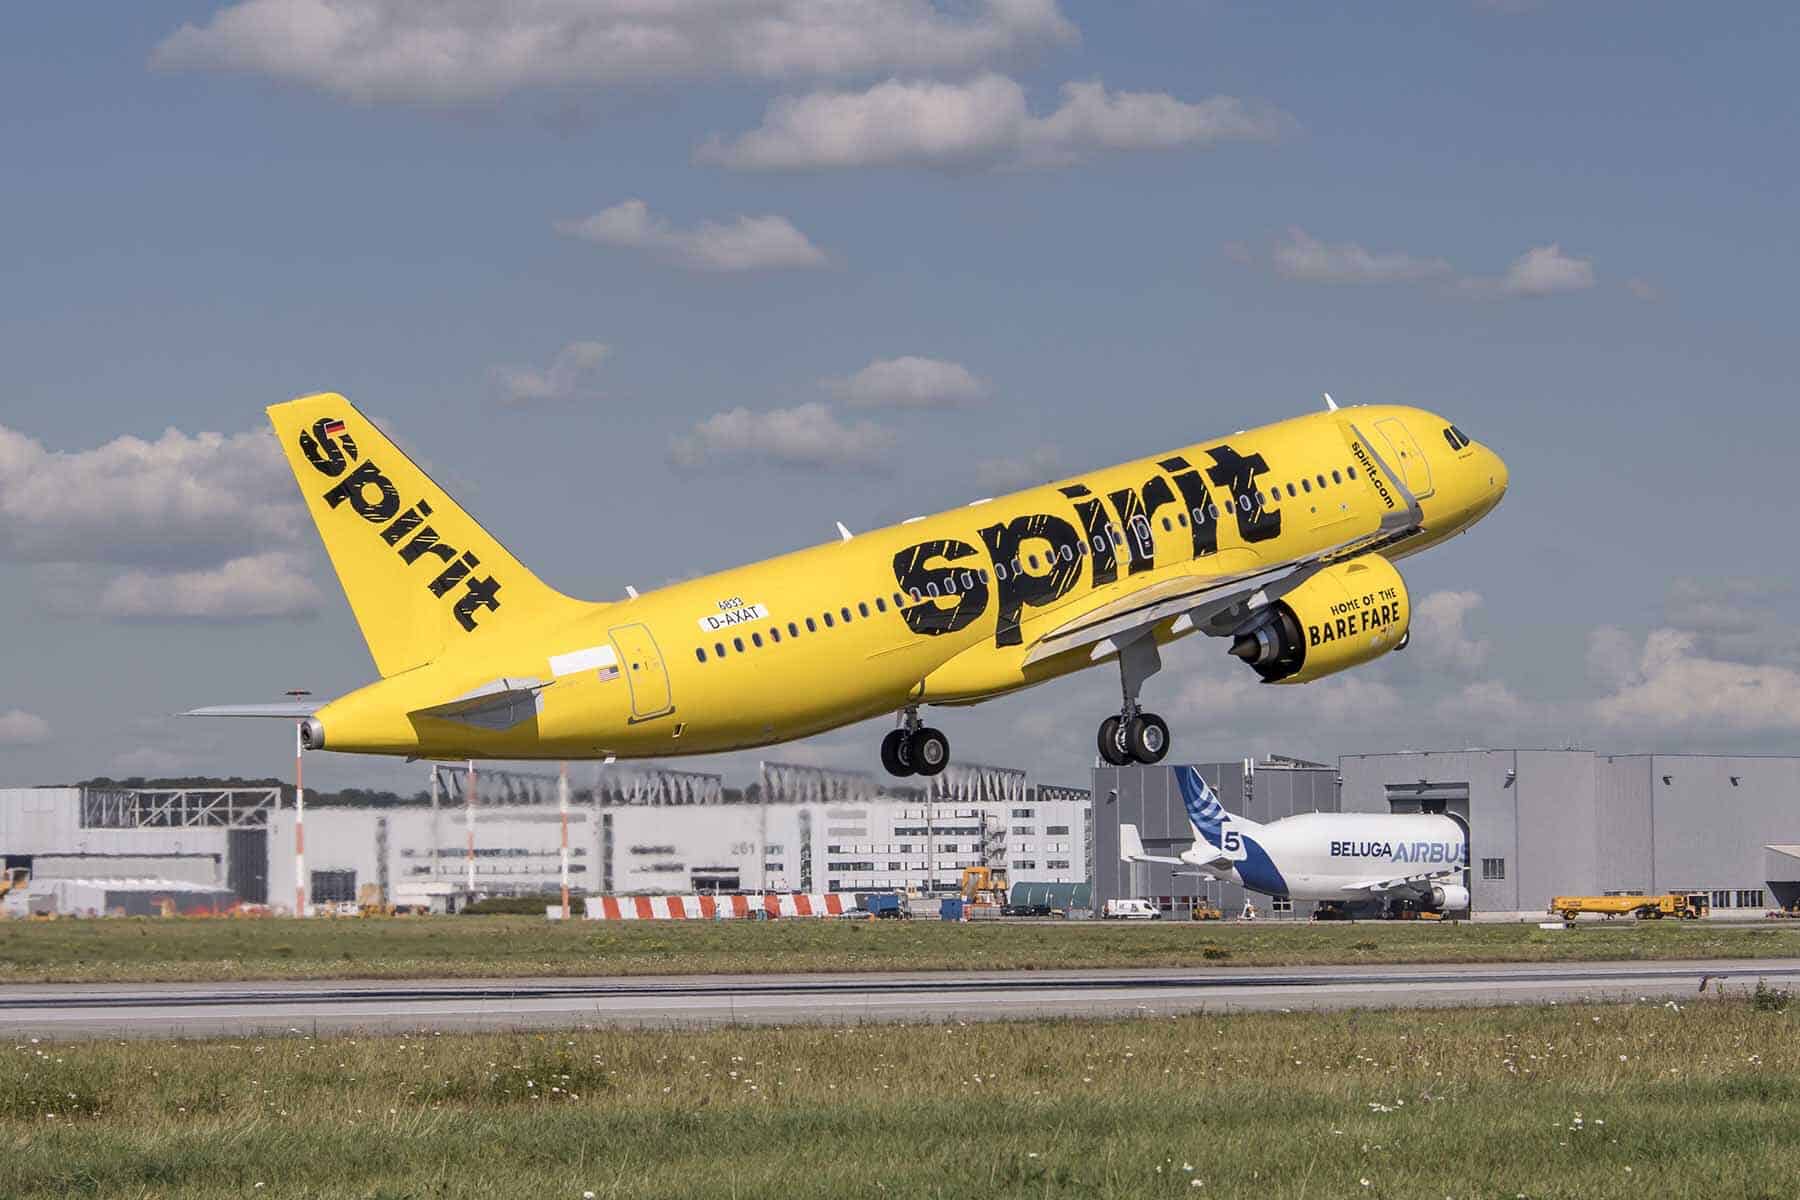 Spirit Airlines finalizes order for 100 Airbus A320neo Family aircraft